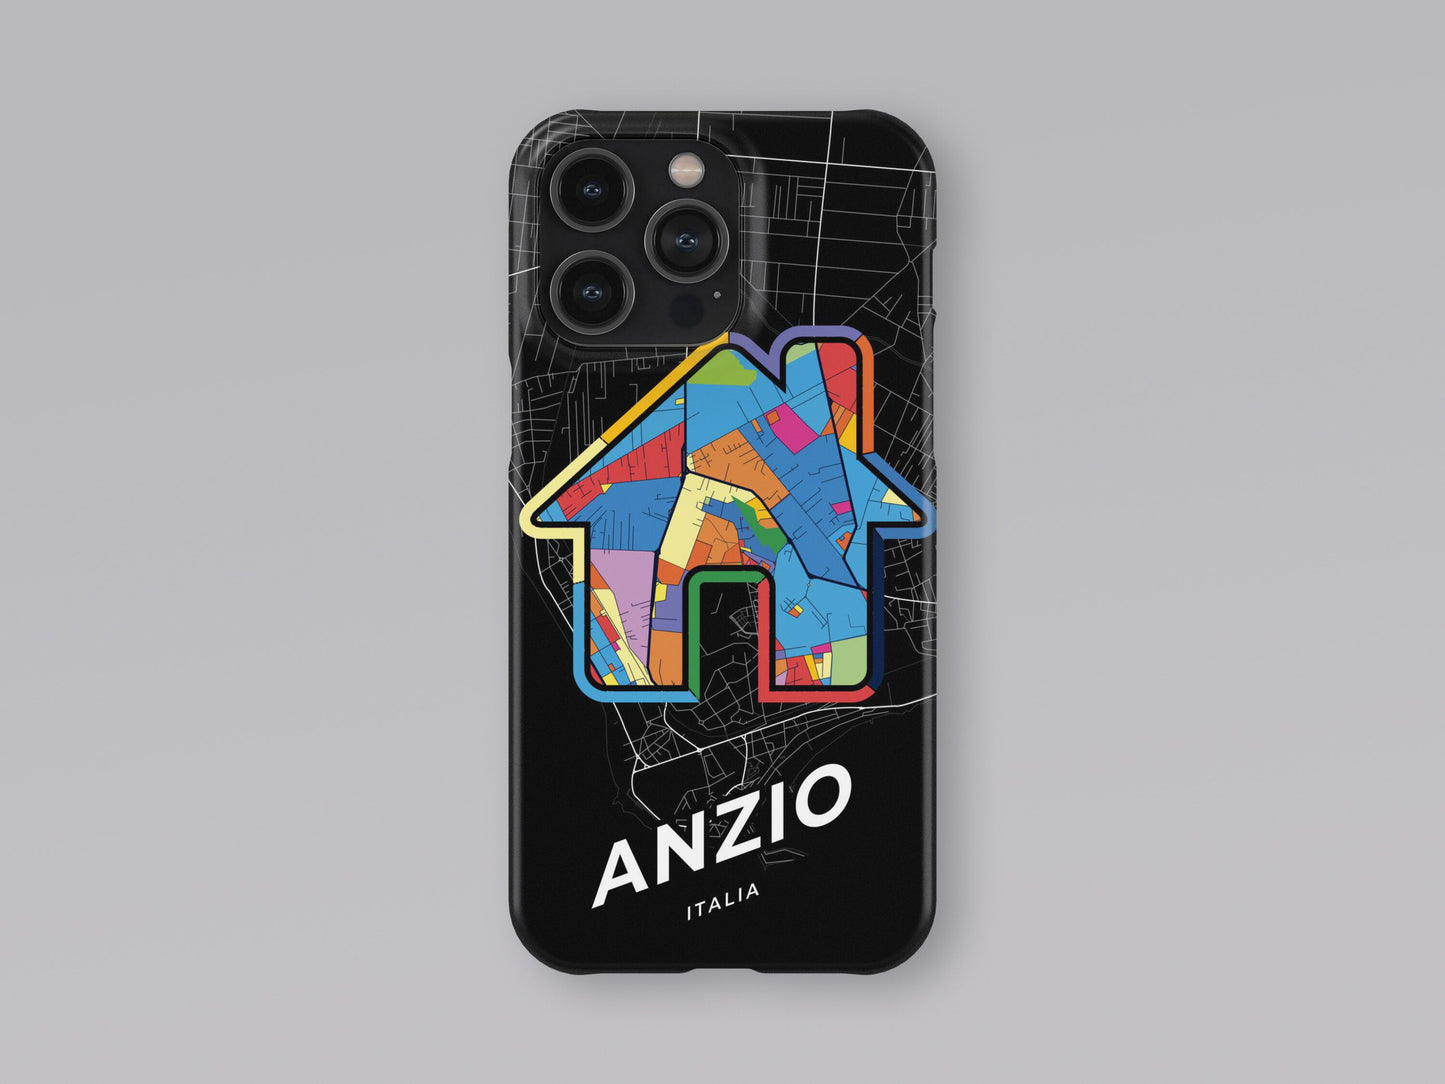 Anzio Italy slim phone case with colorful icon. Birthday, wedding or housewarming gift. Couple match cases. 3